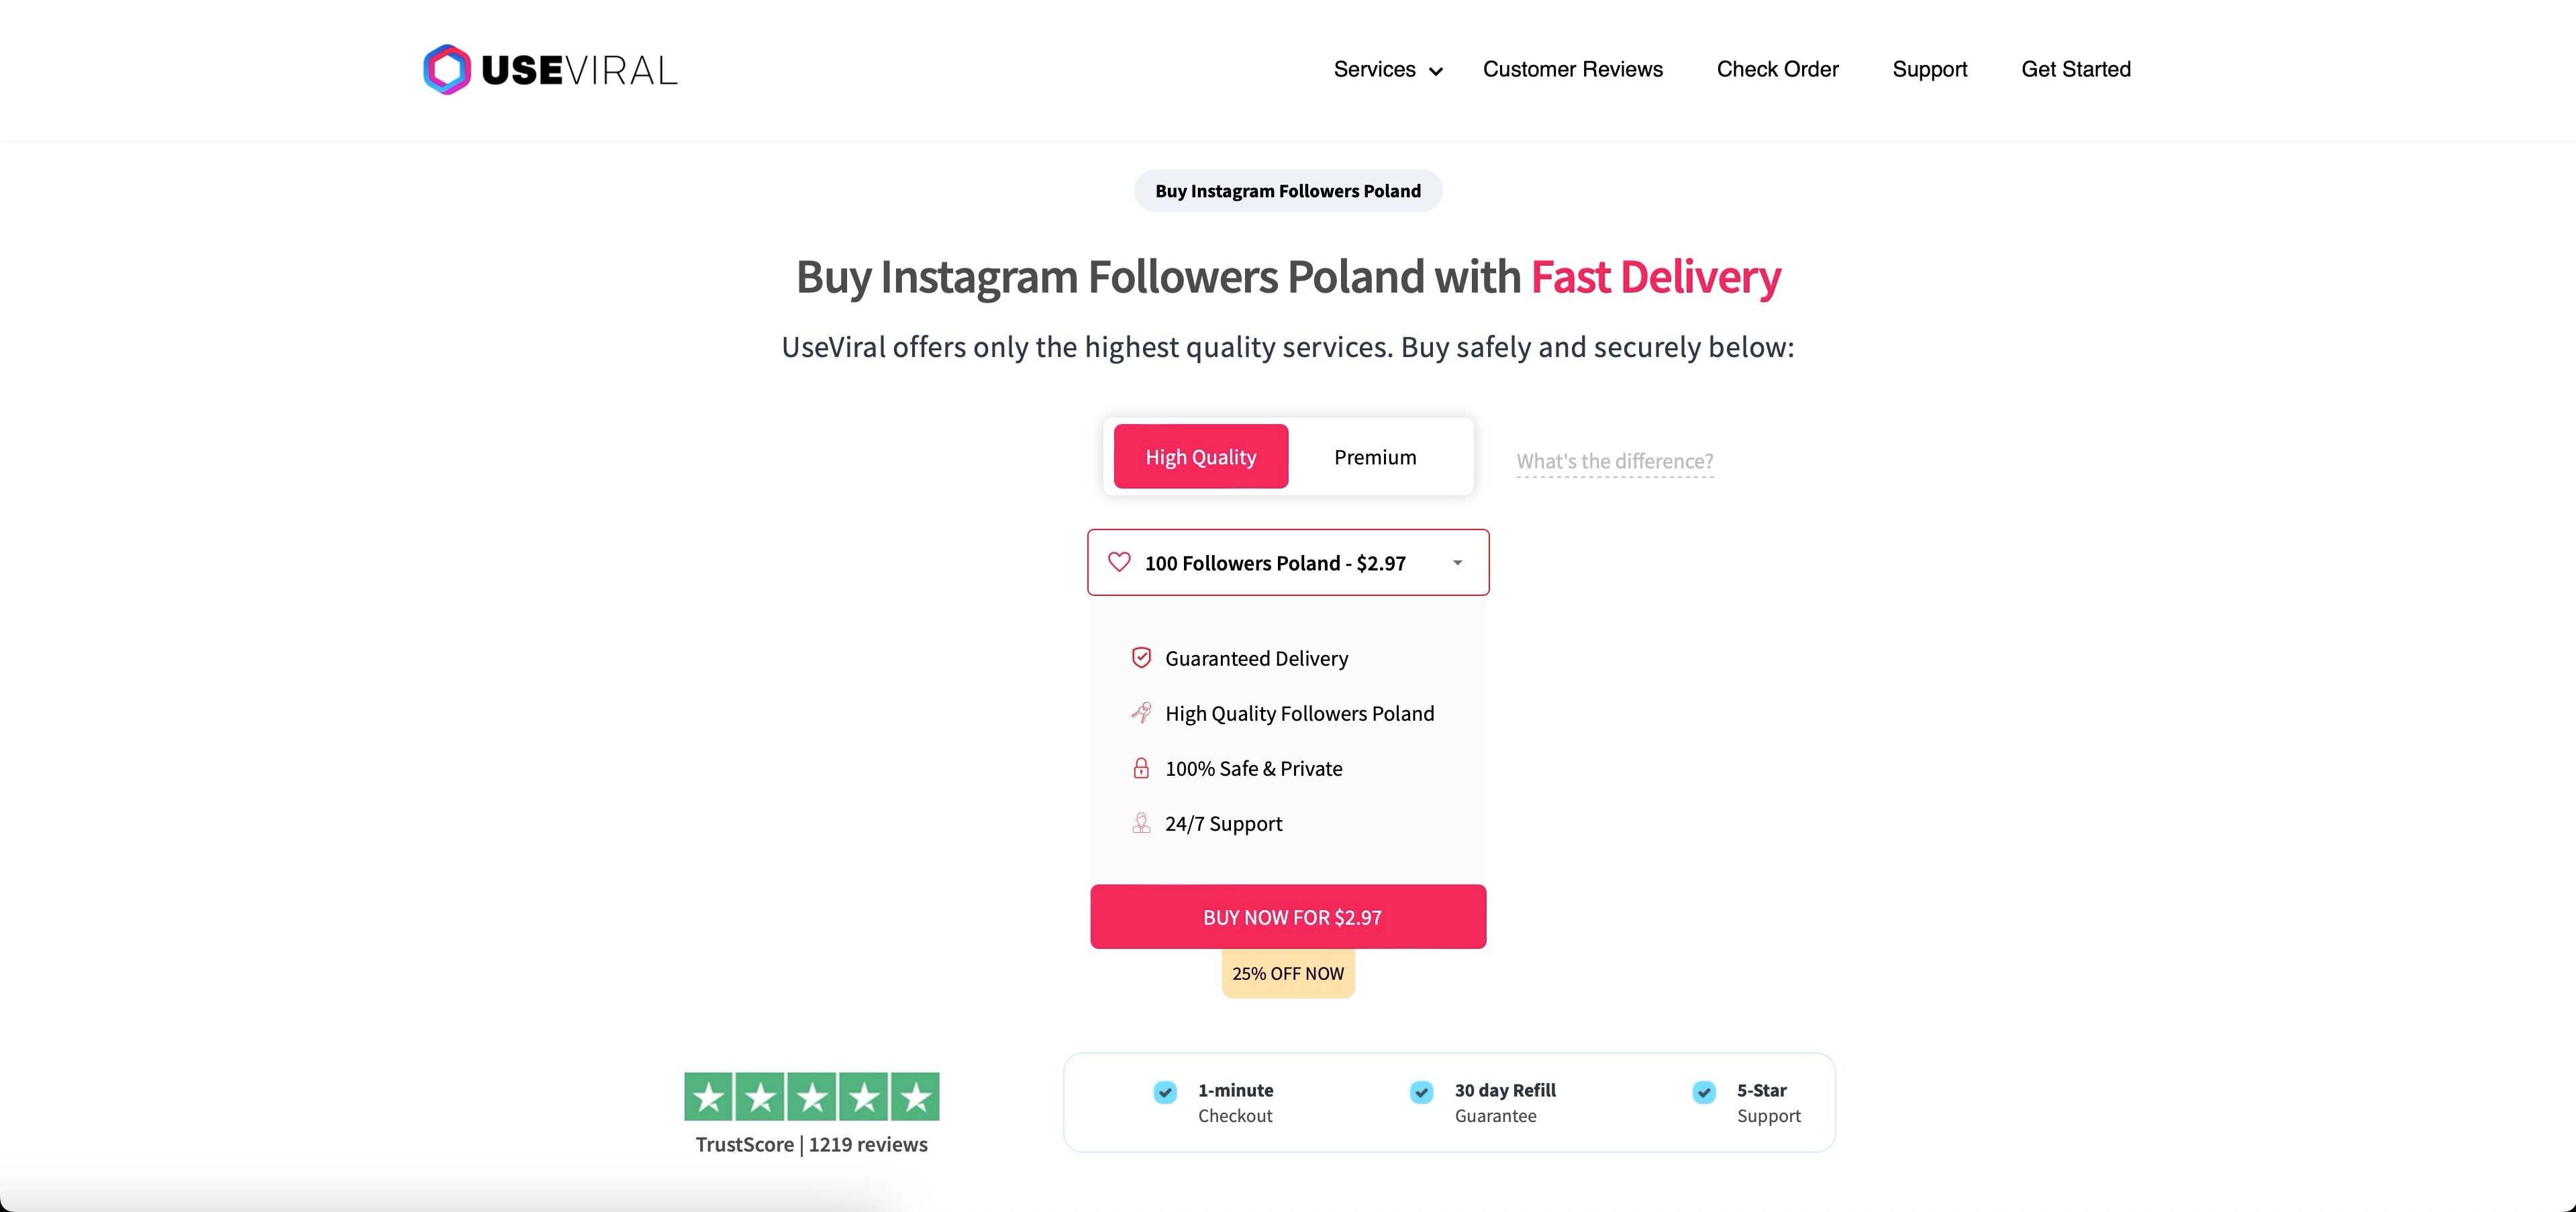 useviral buy instagram followers poland page